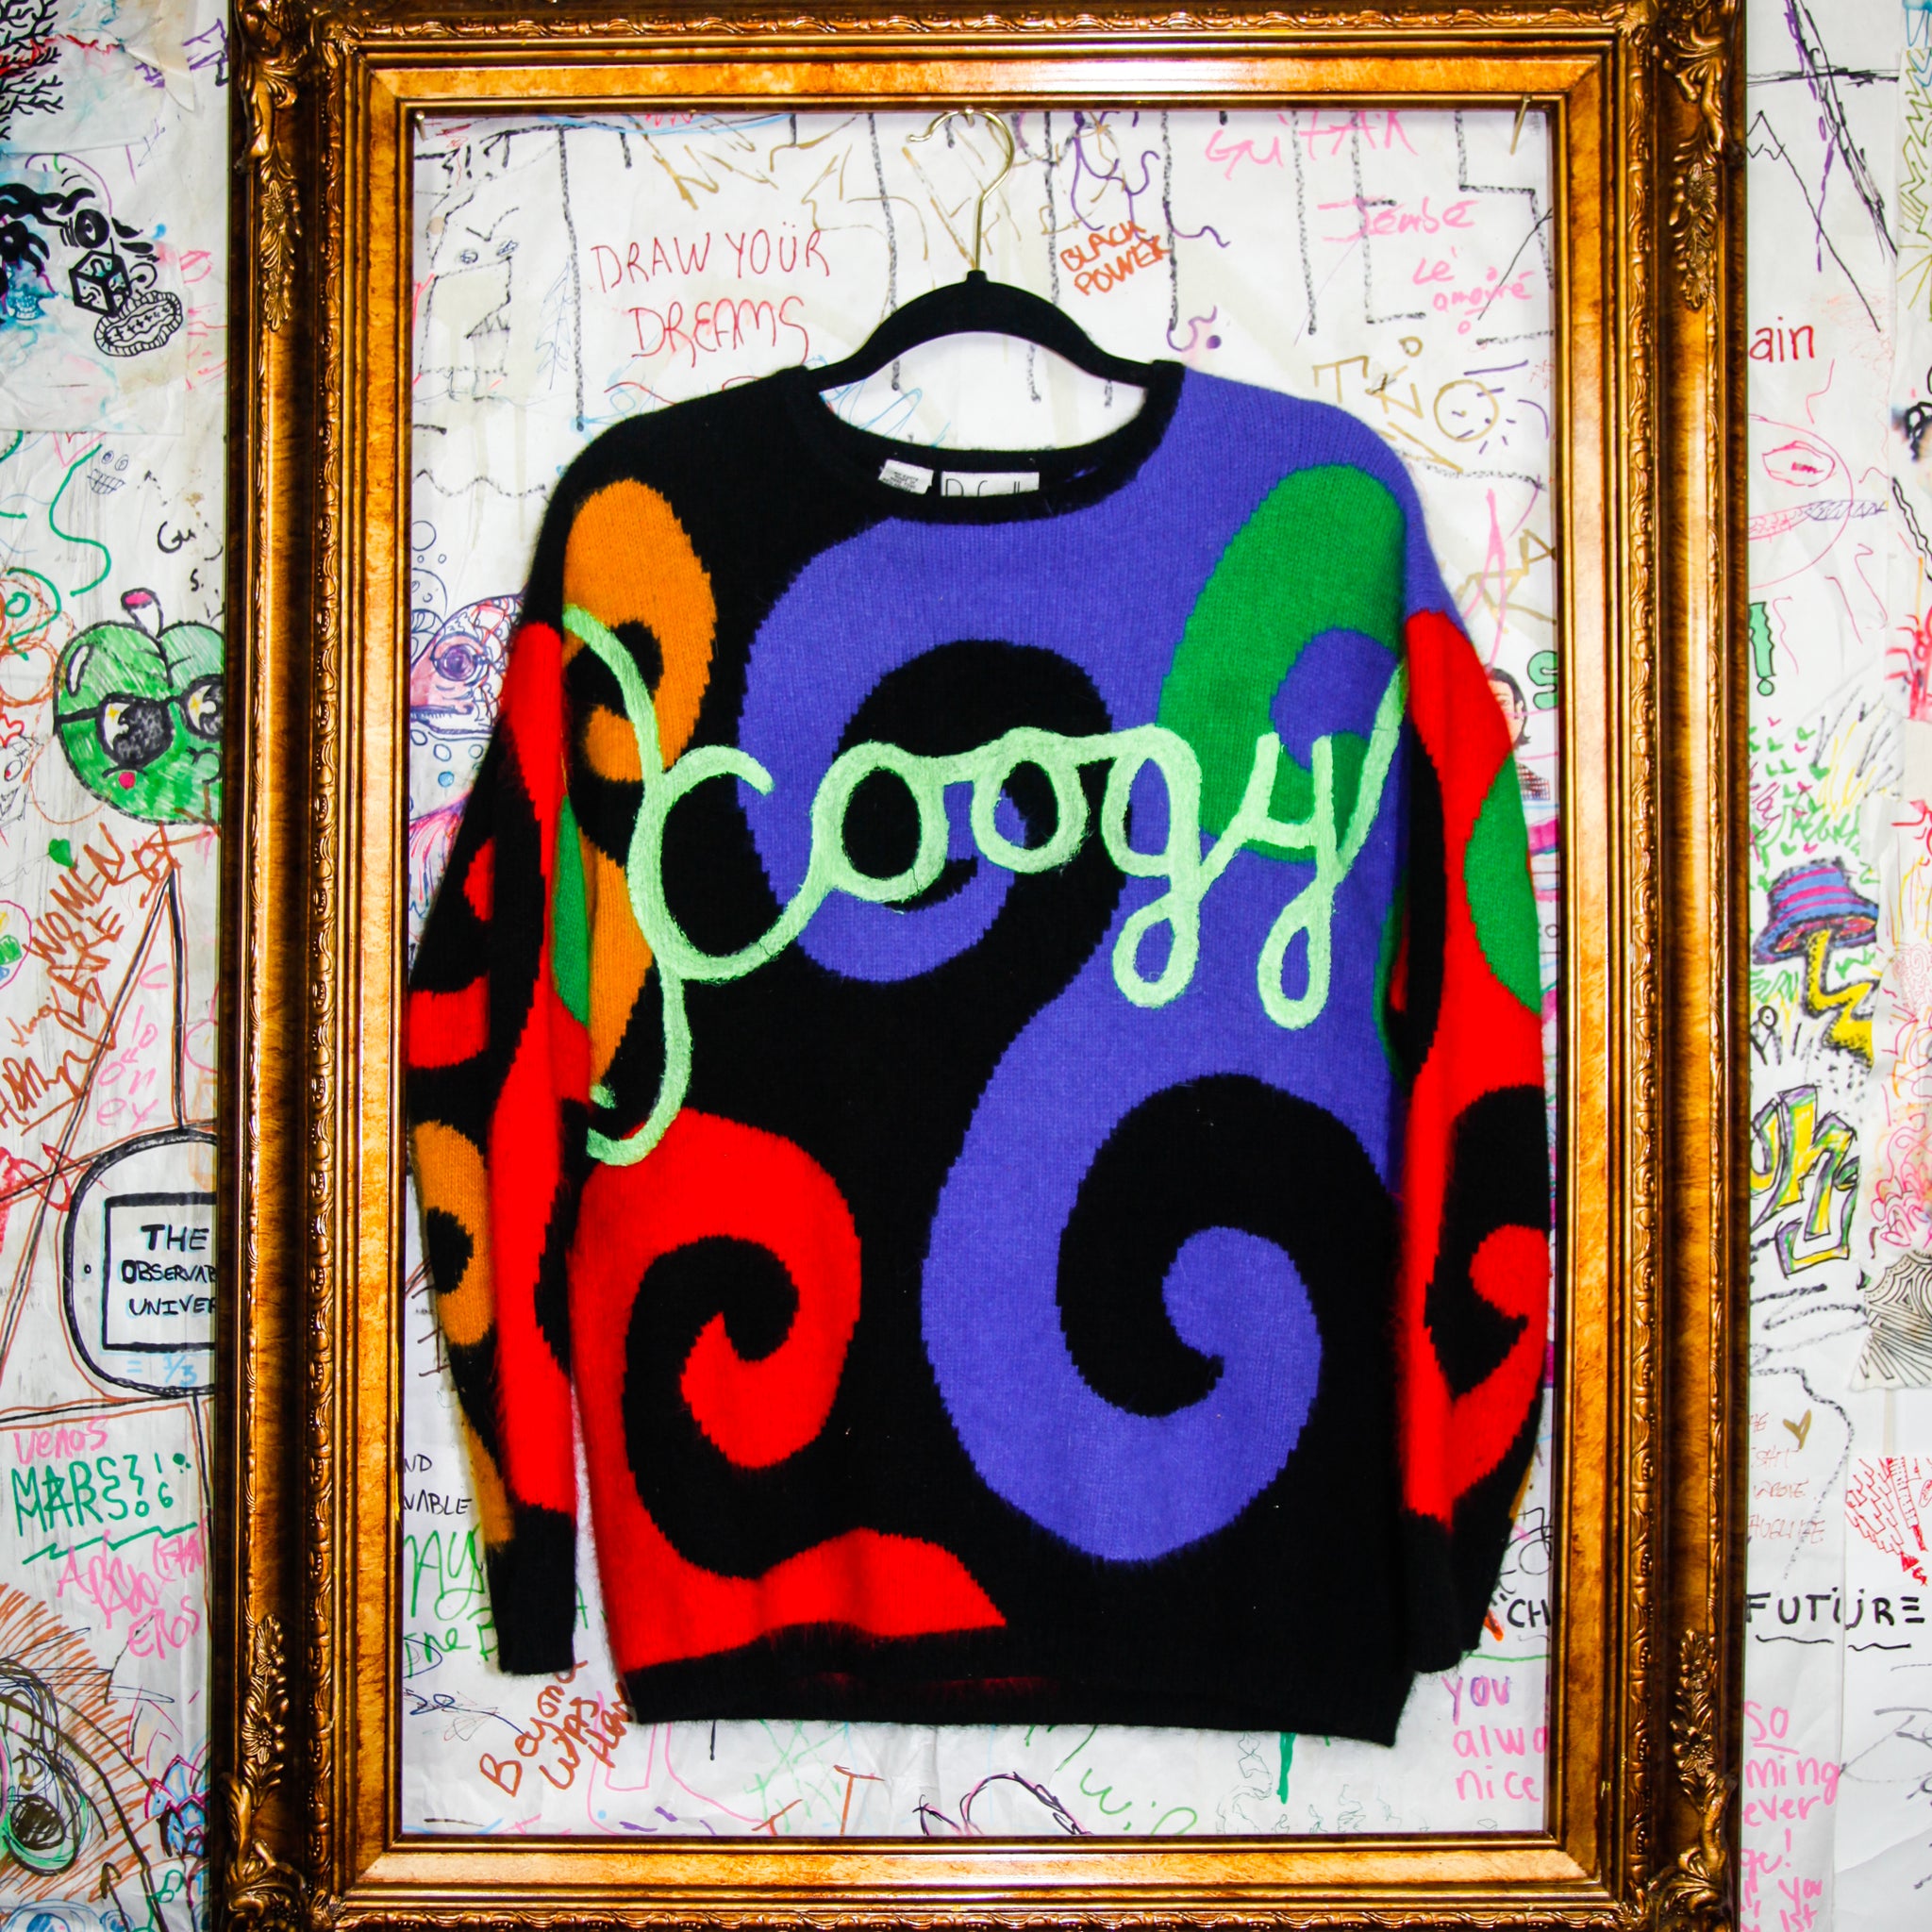 Coogy Hand painted Sweater